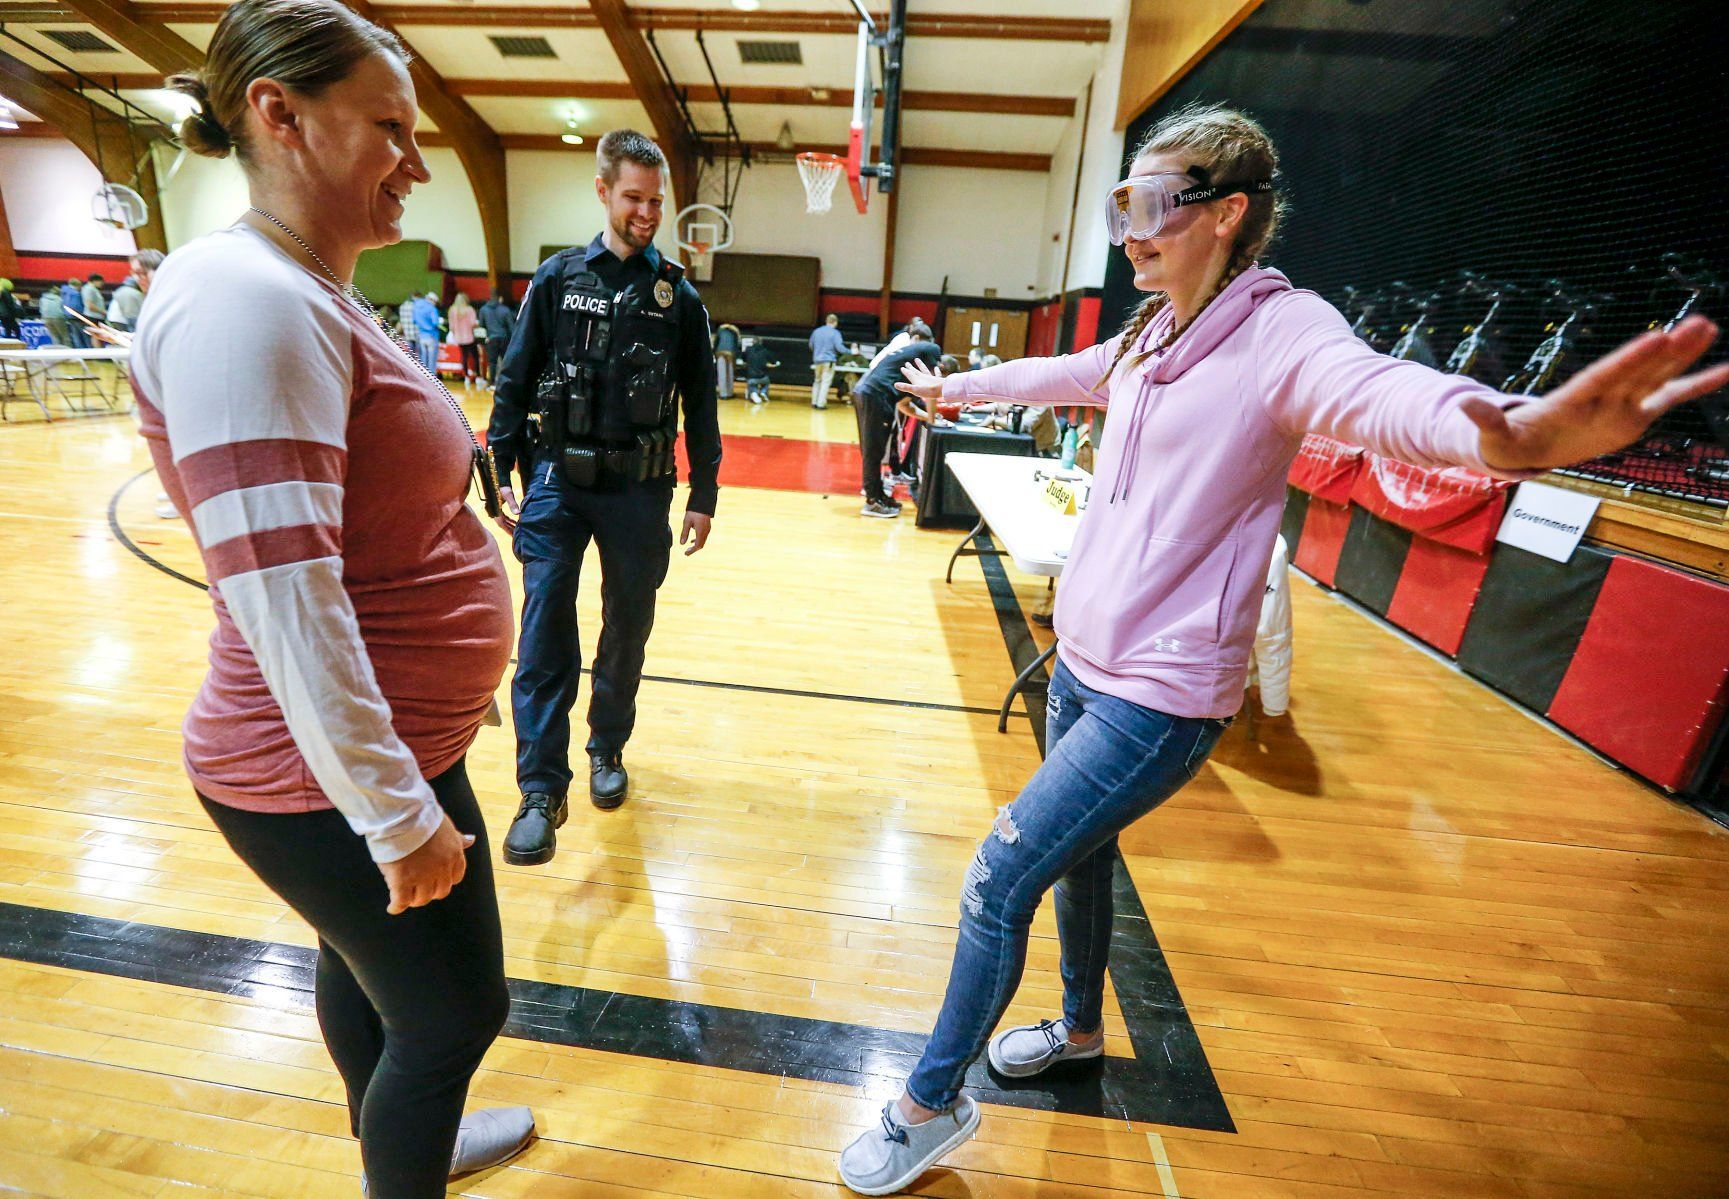 Dyersville, Iowa, Assistant Police Chief Molly Dupont and police officer Andrew Siitari give Western Dubuque High School senior Sidney Heims a sobriety test using goggles to simulate intoxication as part of a Real Life Academy sponsored by Dyersville Area Chamber of Commerce at the school on Tuesday, Jan. 18, 2022.    PHOTO CREDIT: Dave Kettering